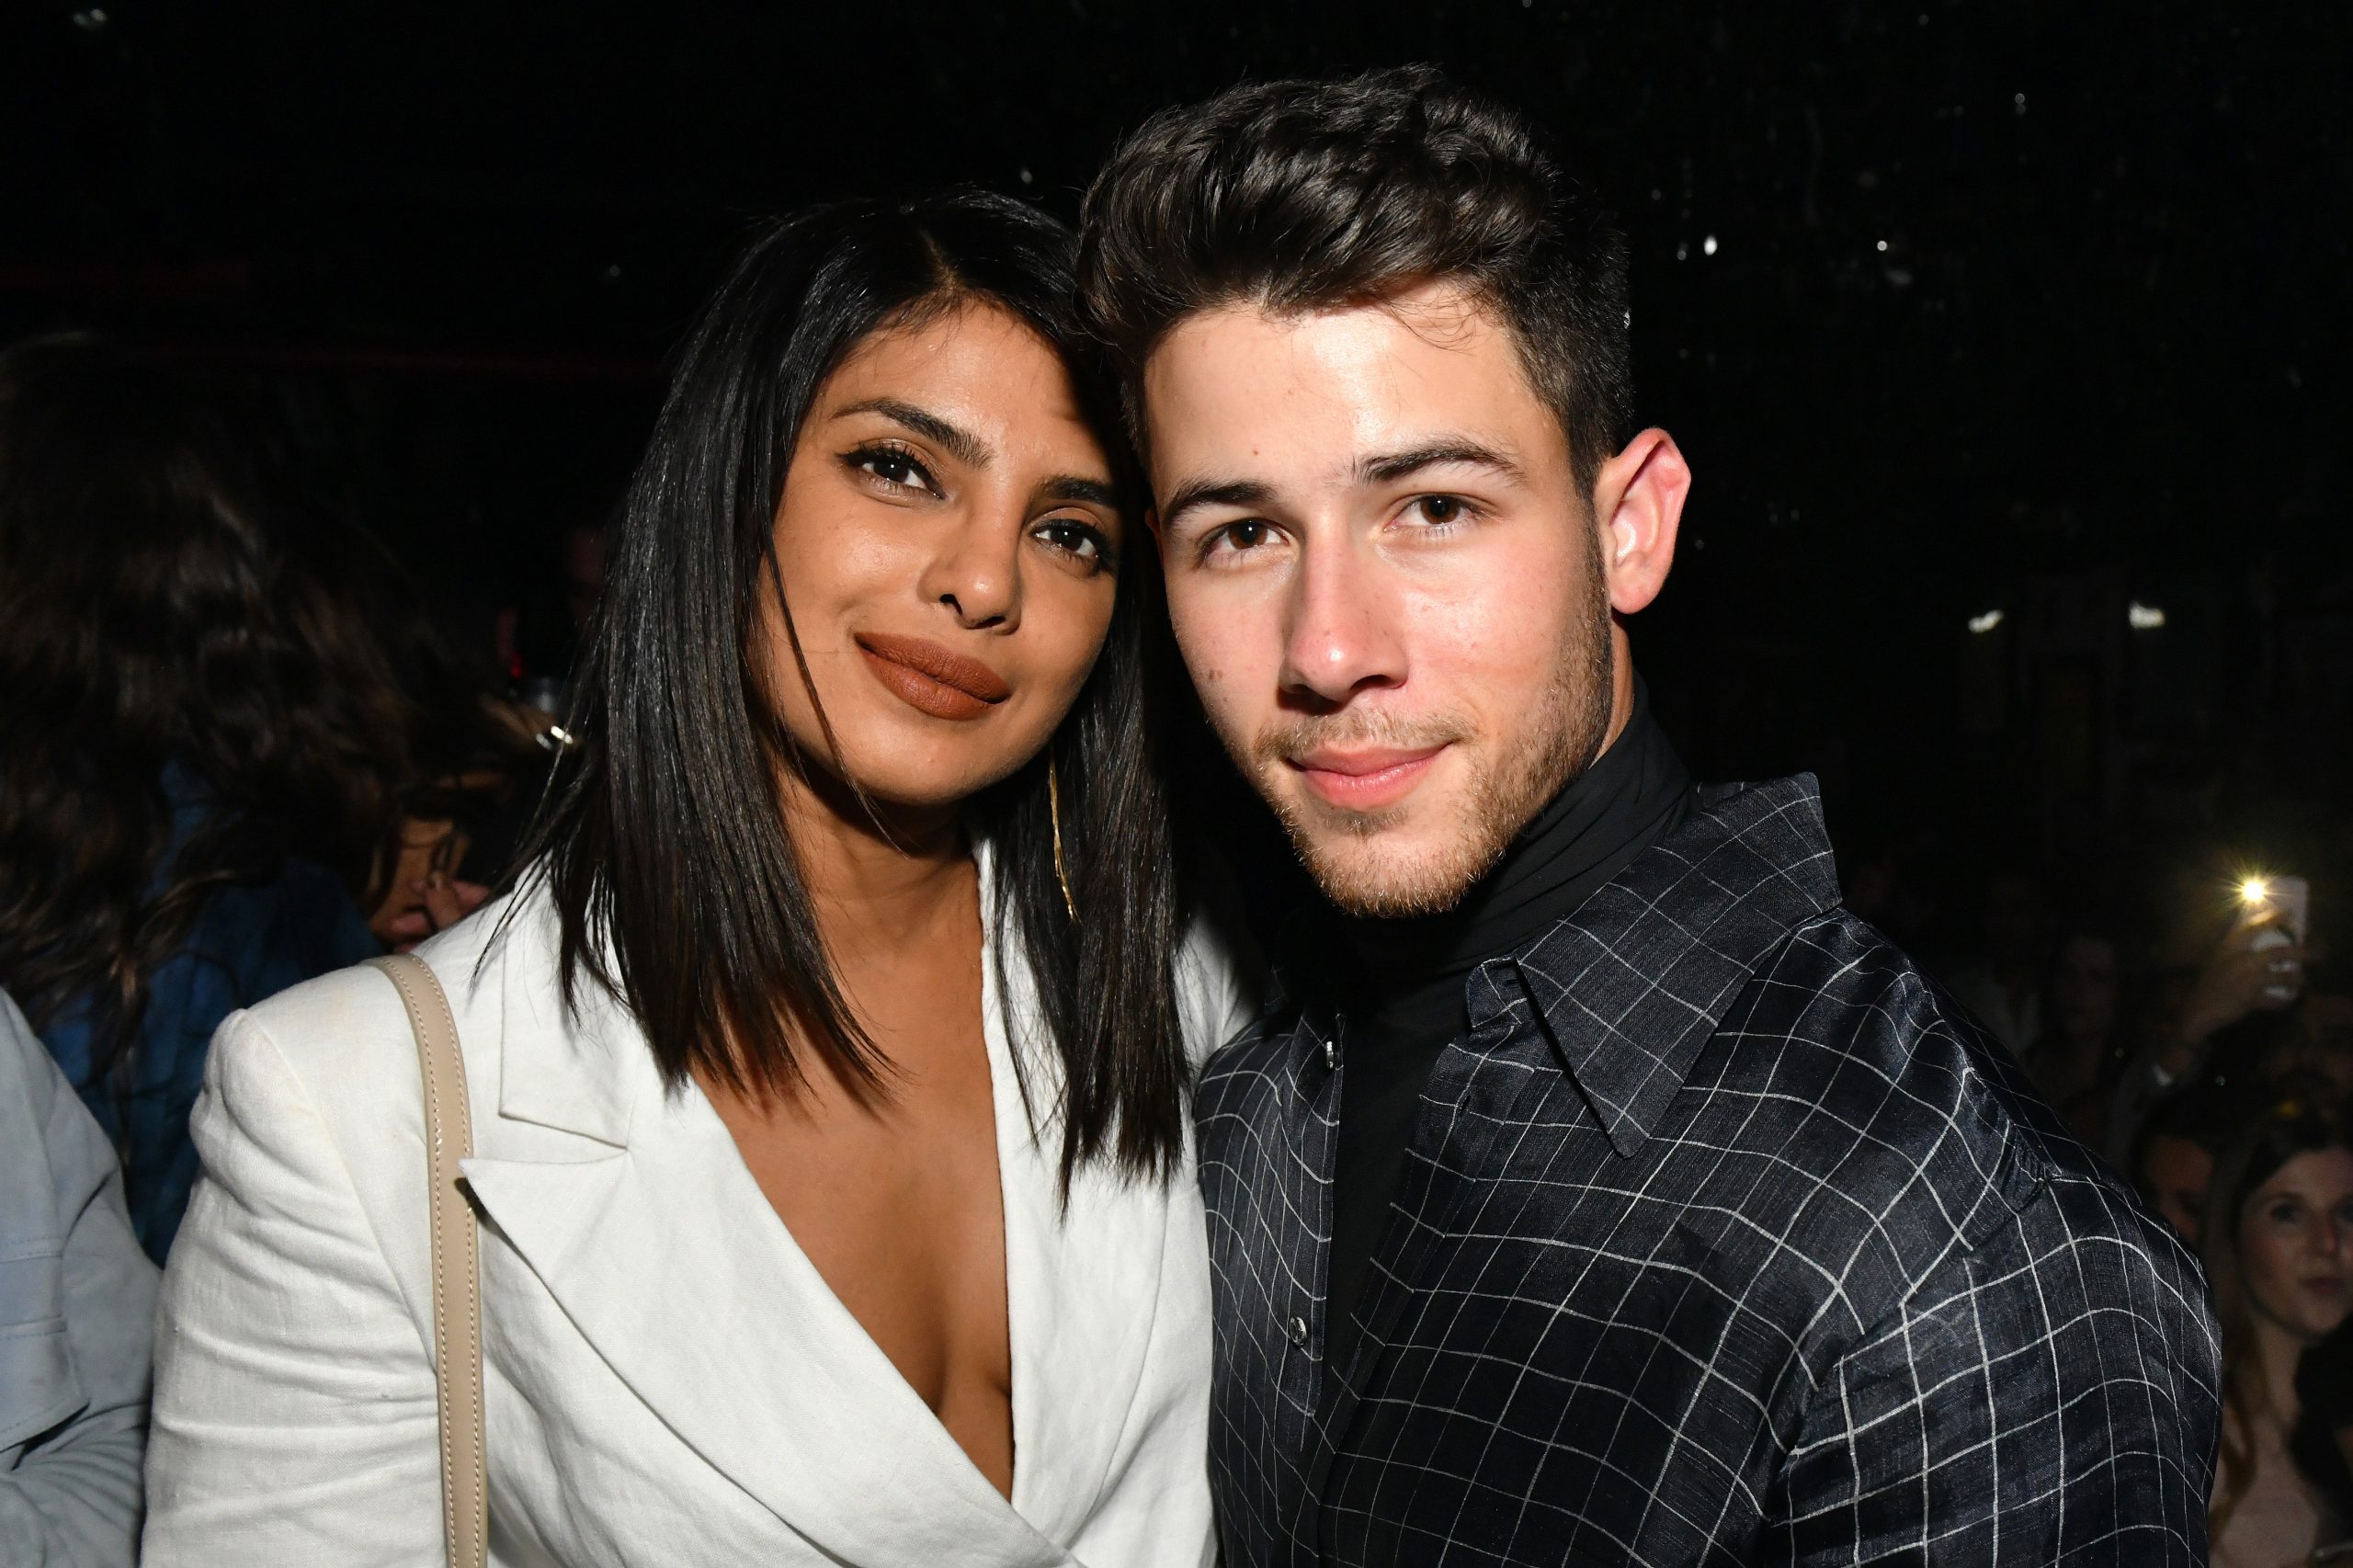 Nick Jonas Wiki, Bio, Age, Net Worth, and Other Facts